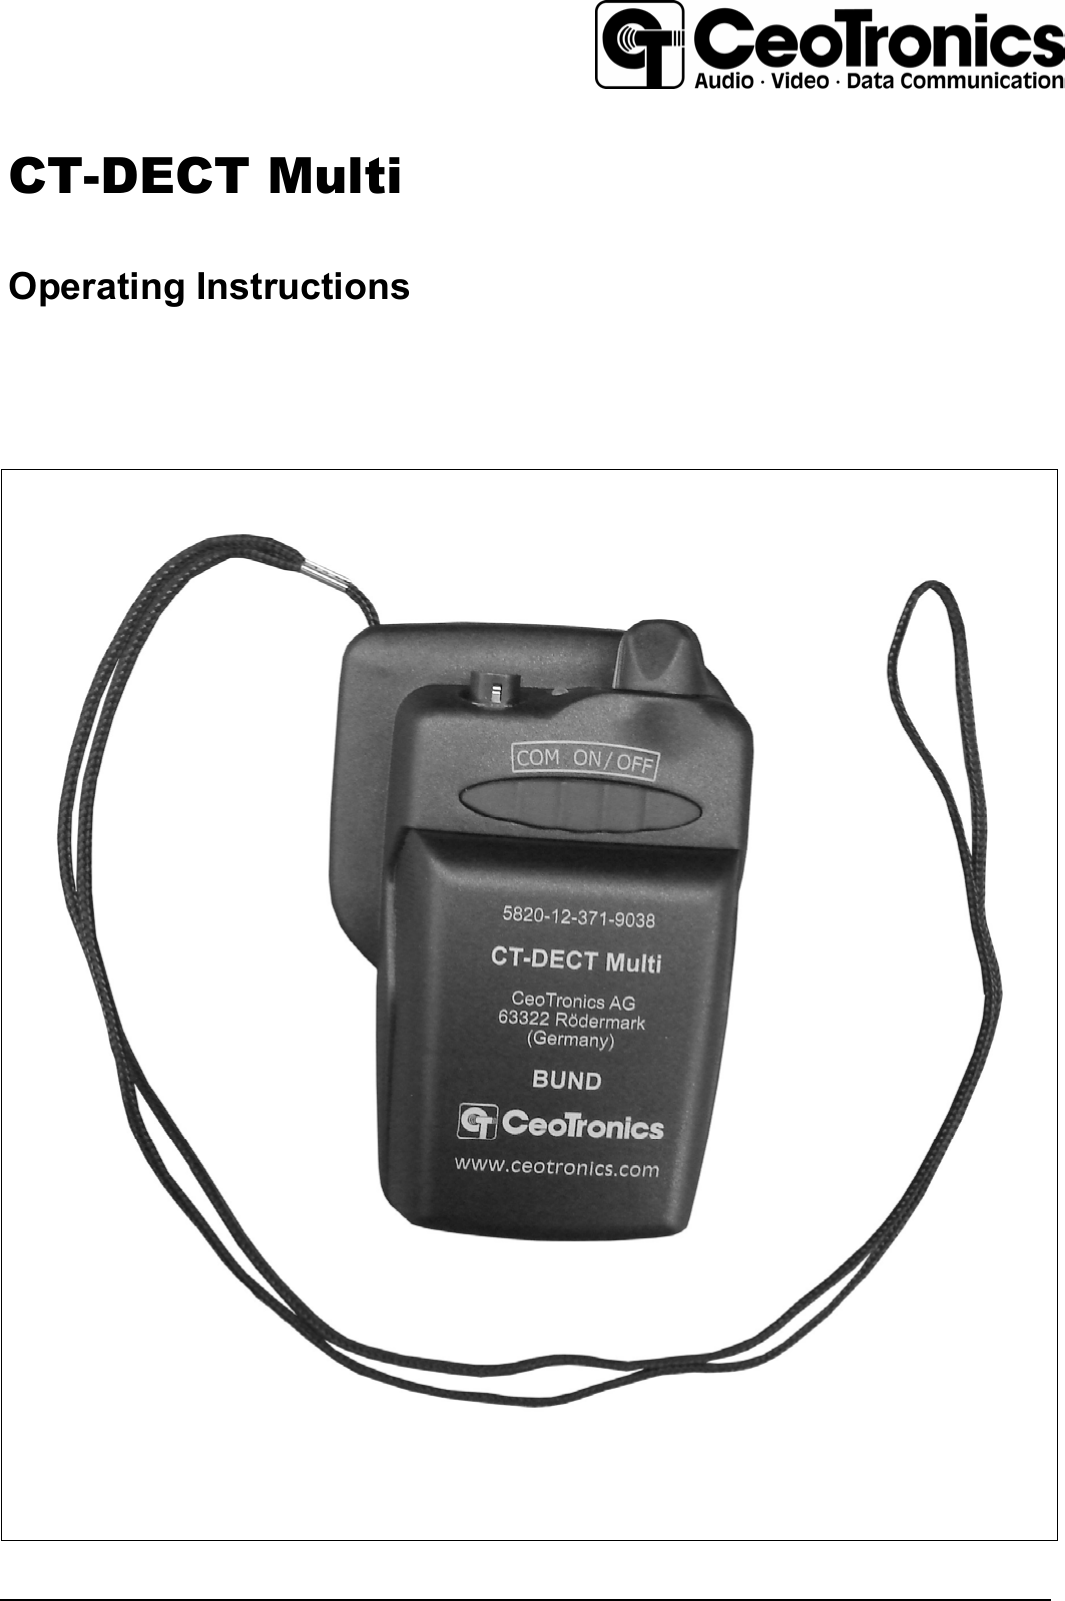      CT-DECT Multi    Operating Instructions        